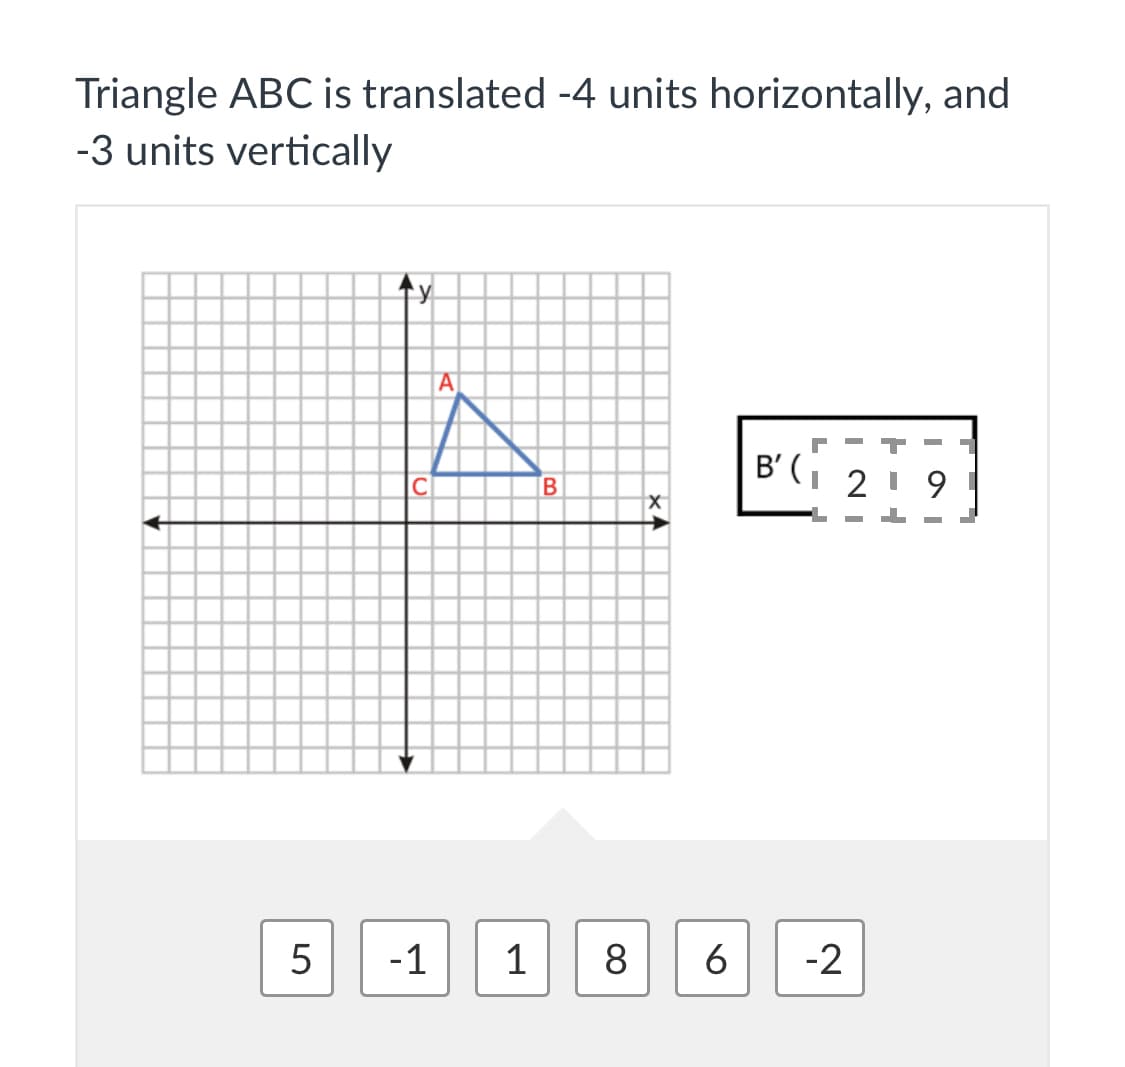 Triangle ABC is translated -4 units horizontally, and
-3 units vertically
个y
B' (, 2 ' 9
-1
1
8
6
-2
